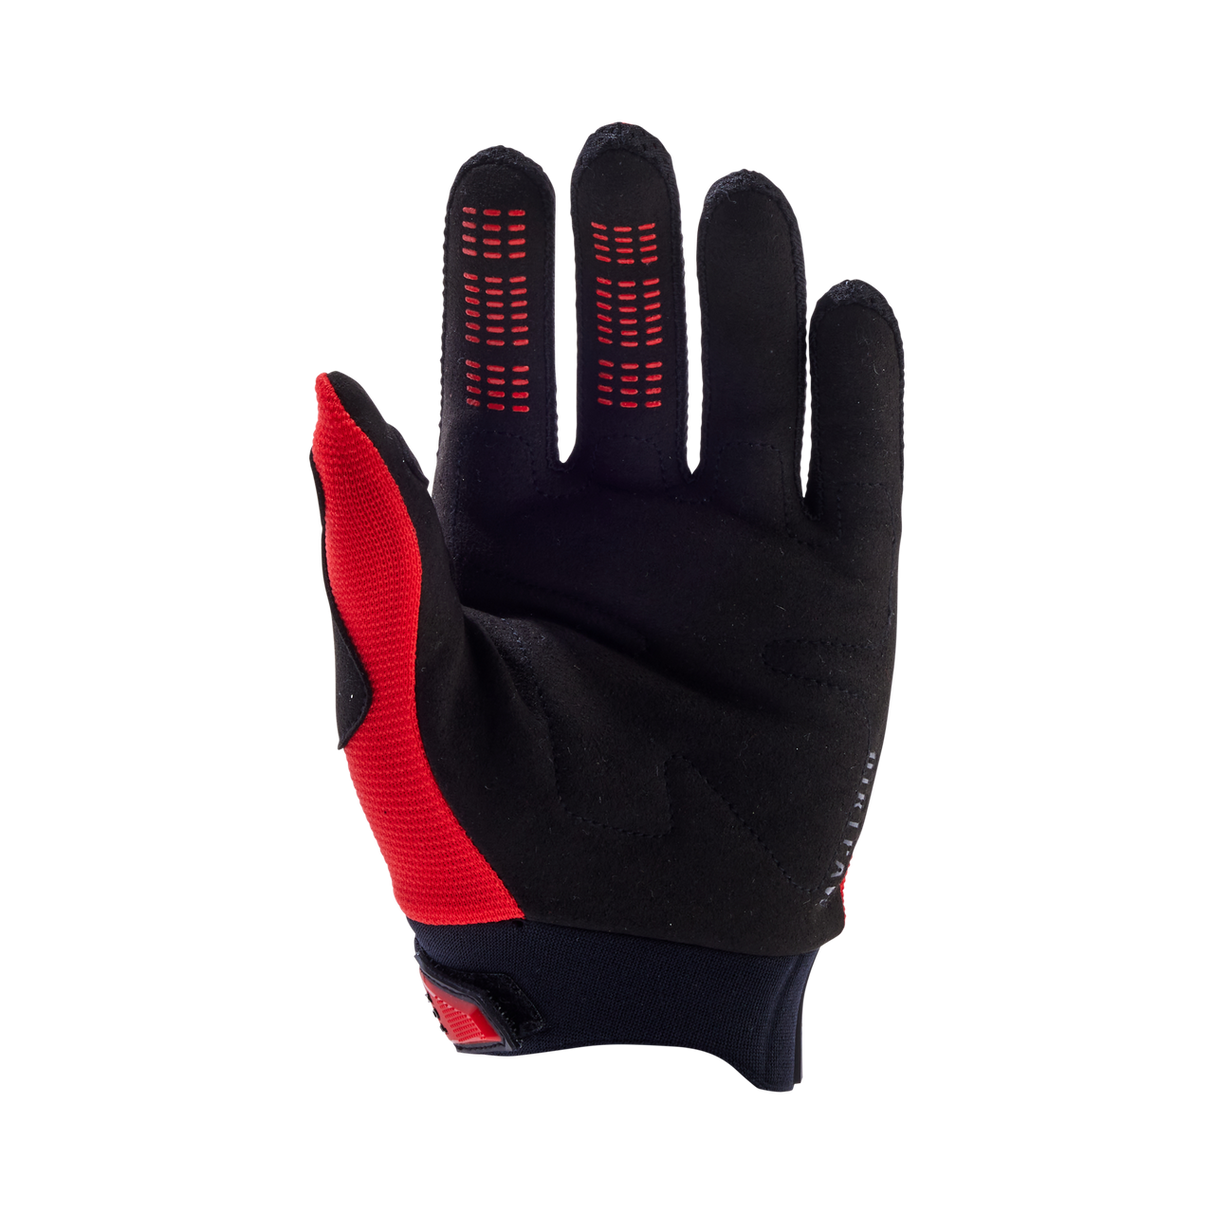 Fox Youth Dirtpaw Gloves Fluorescent Red